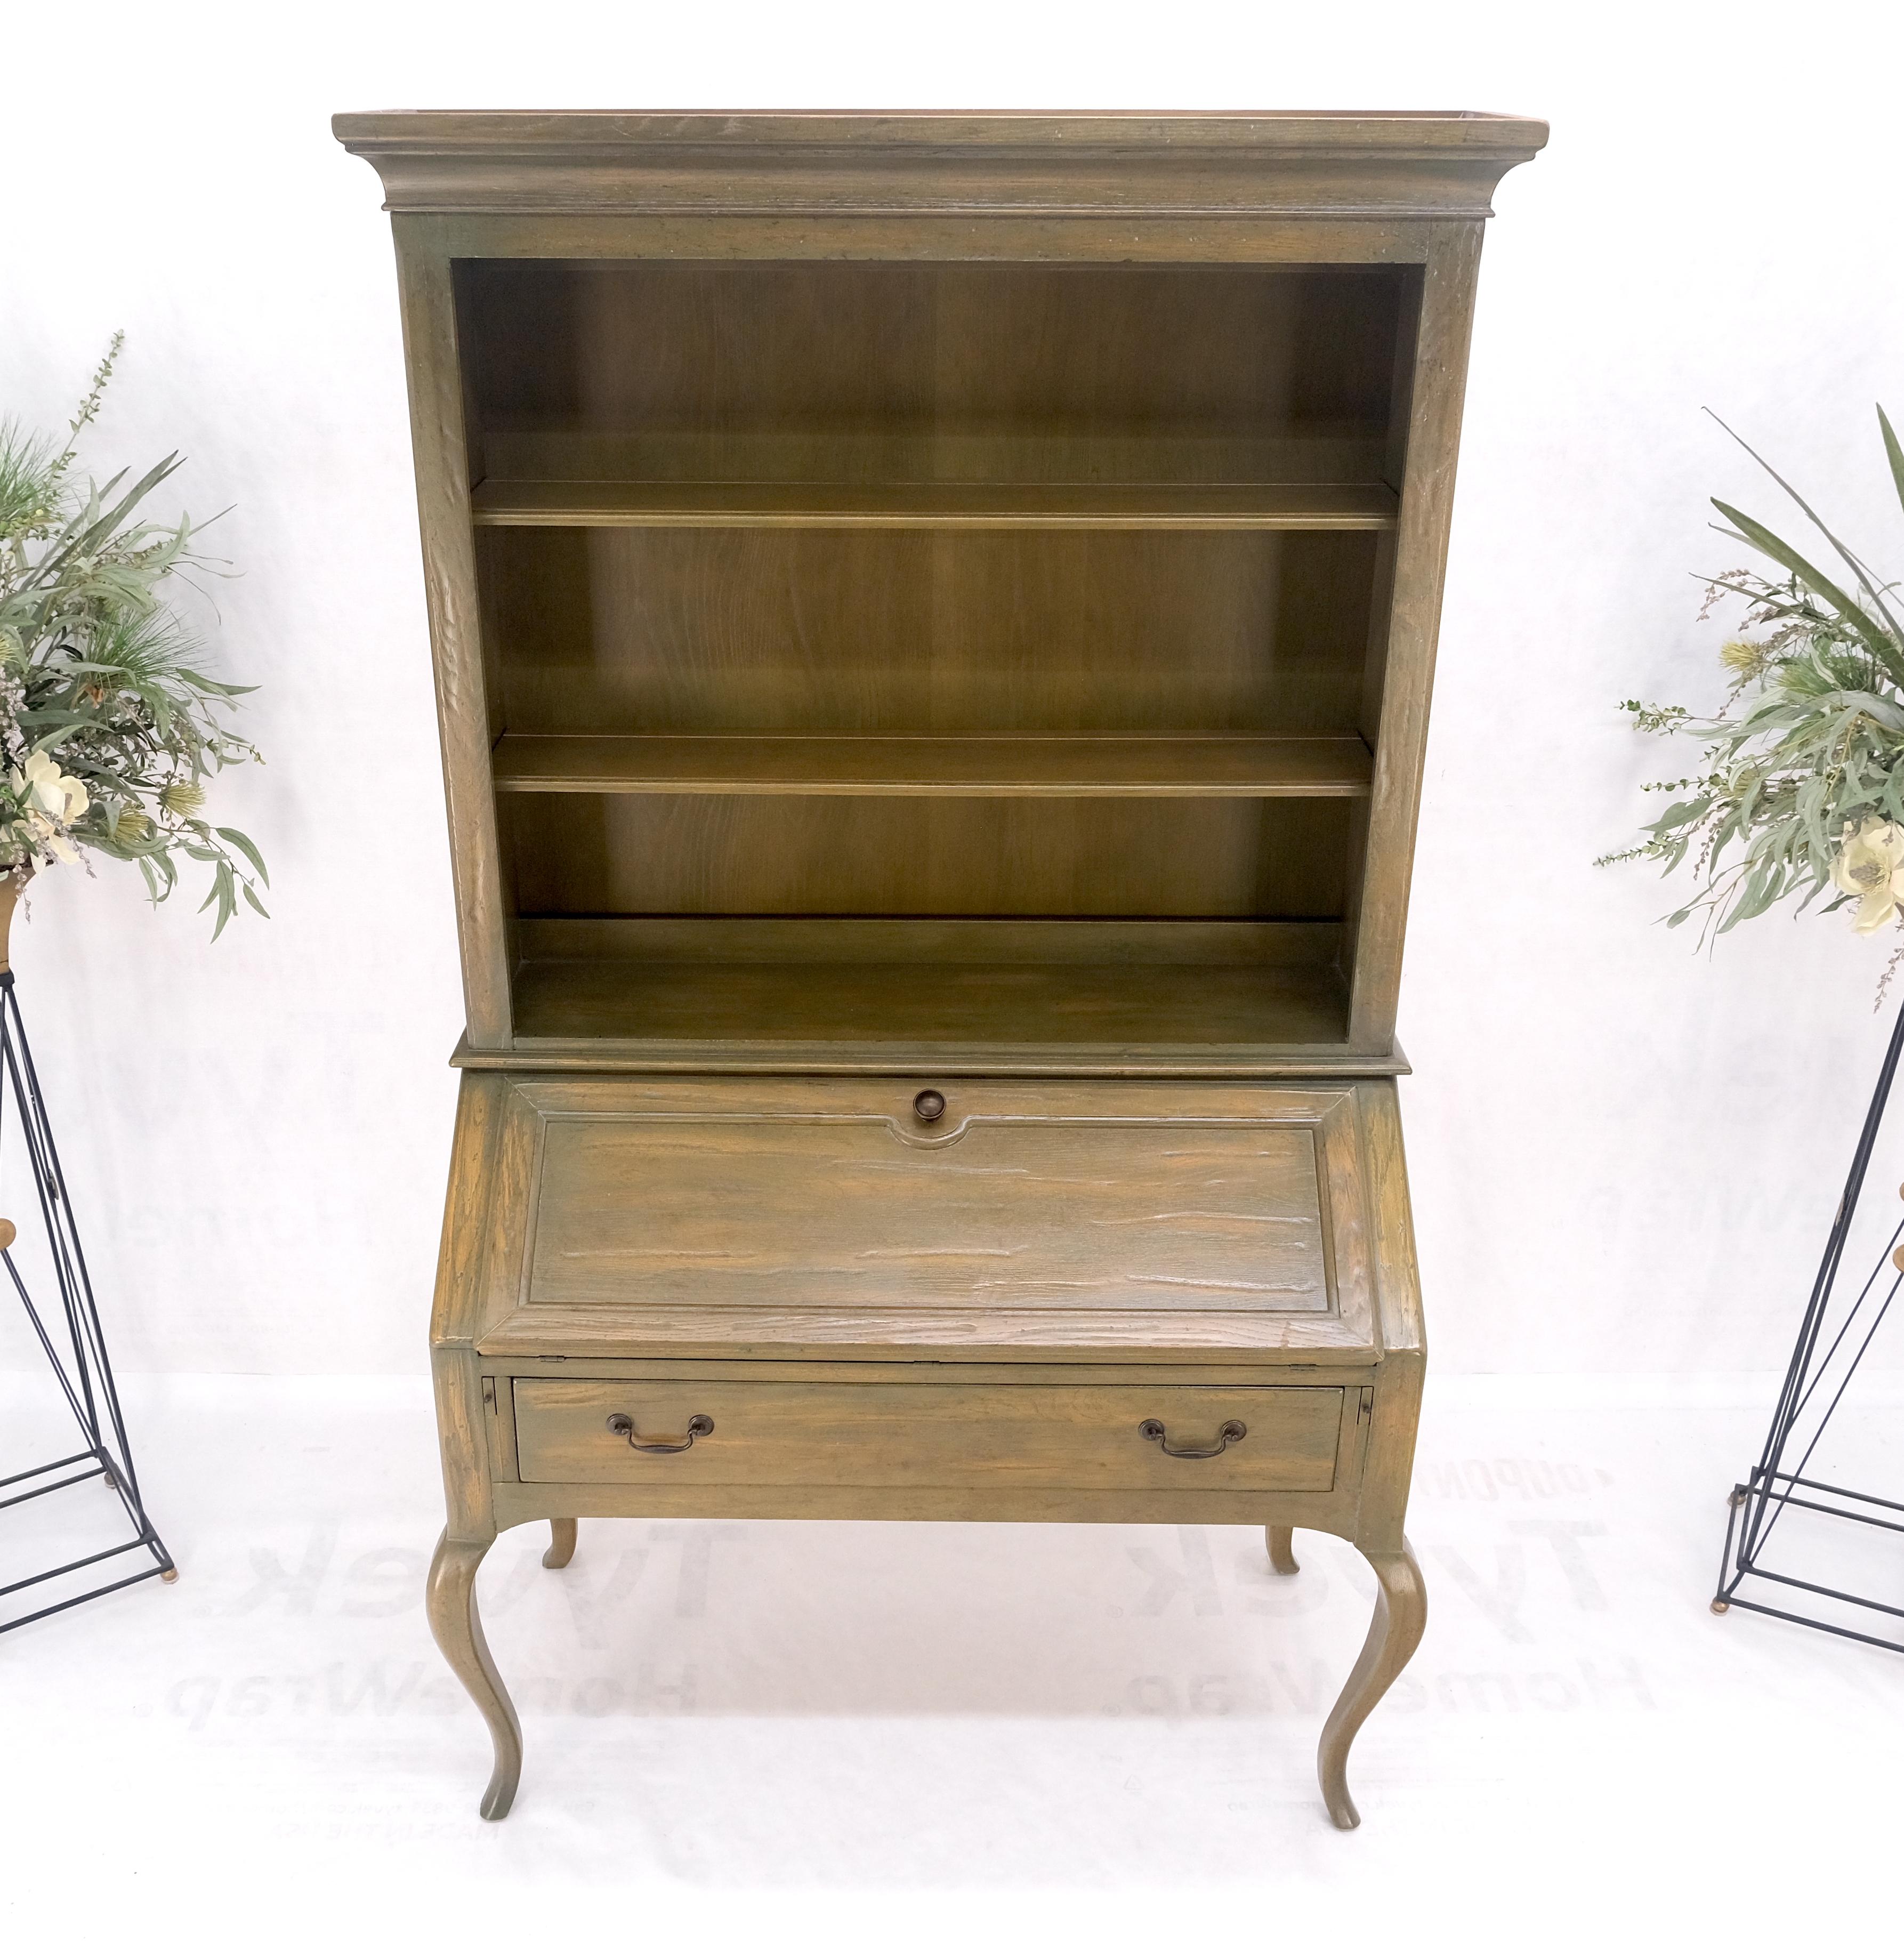 Henredon Solid Oak Olive Finish Wide Open Bookcase Secretary Desk Country French In Excellent Condition For Sale In Rockaway, NJ